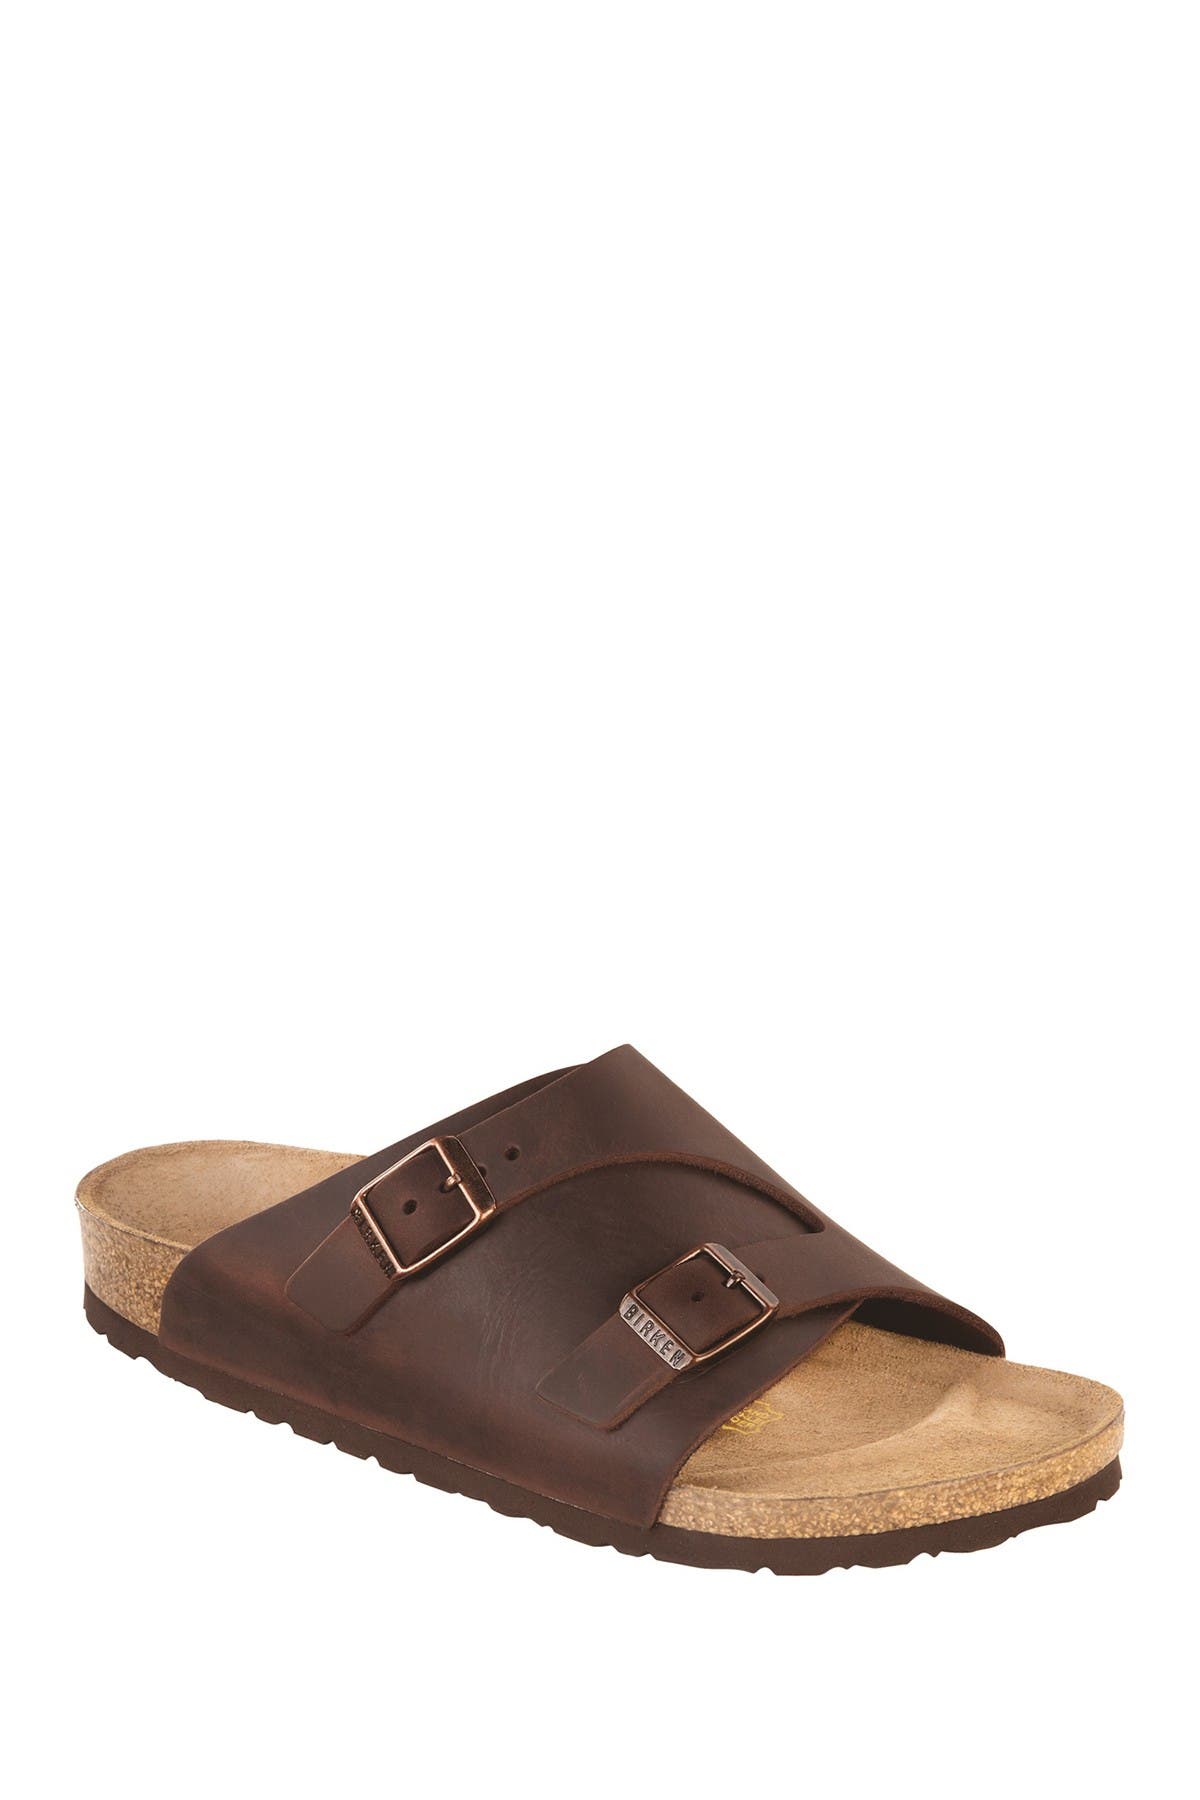 Zurich Habana Oiled Leather Sandal 